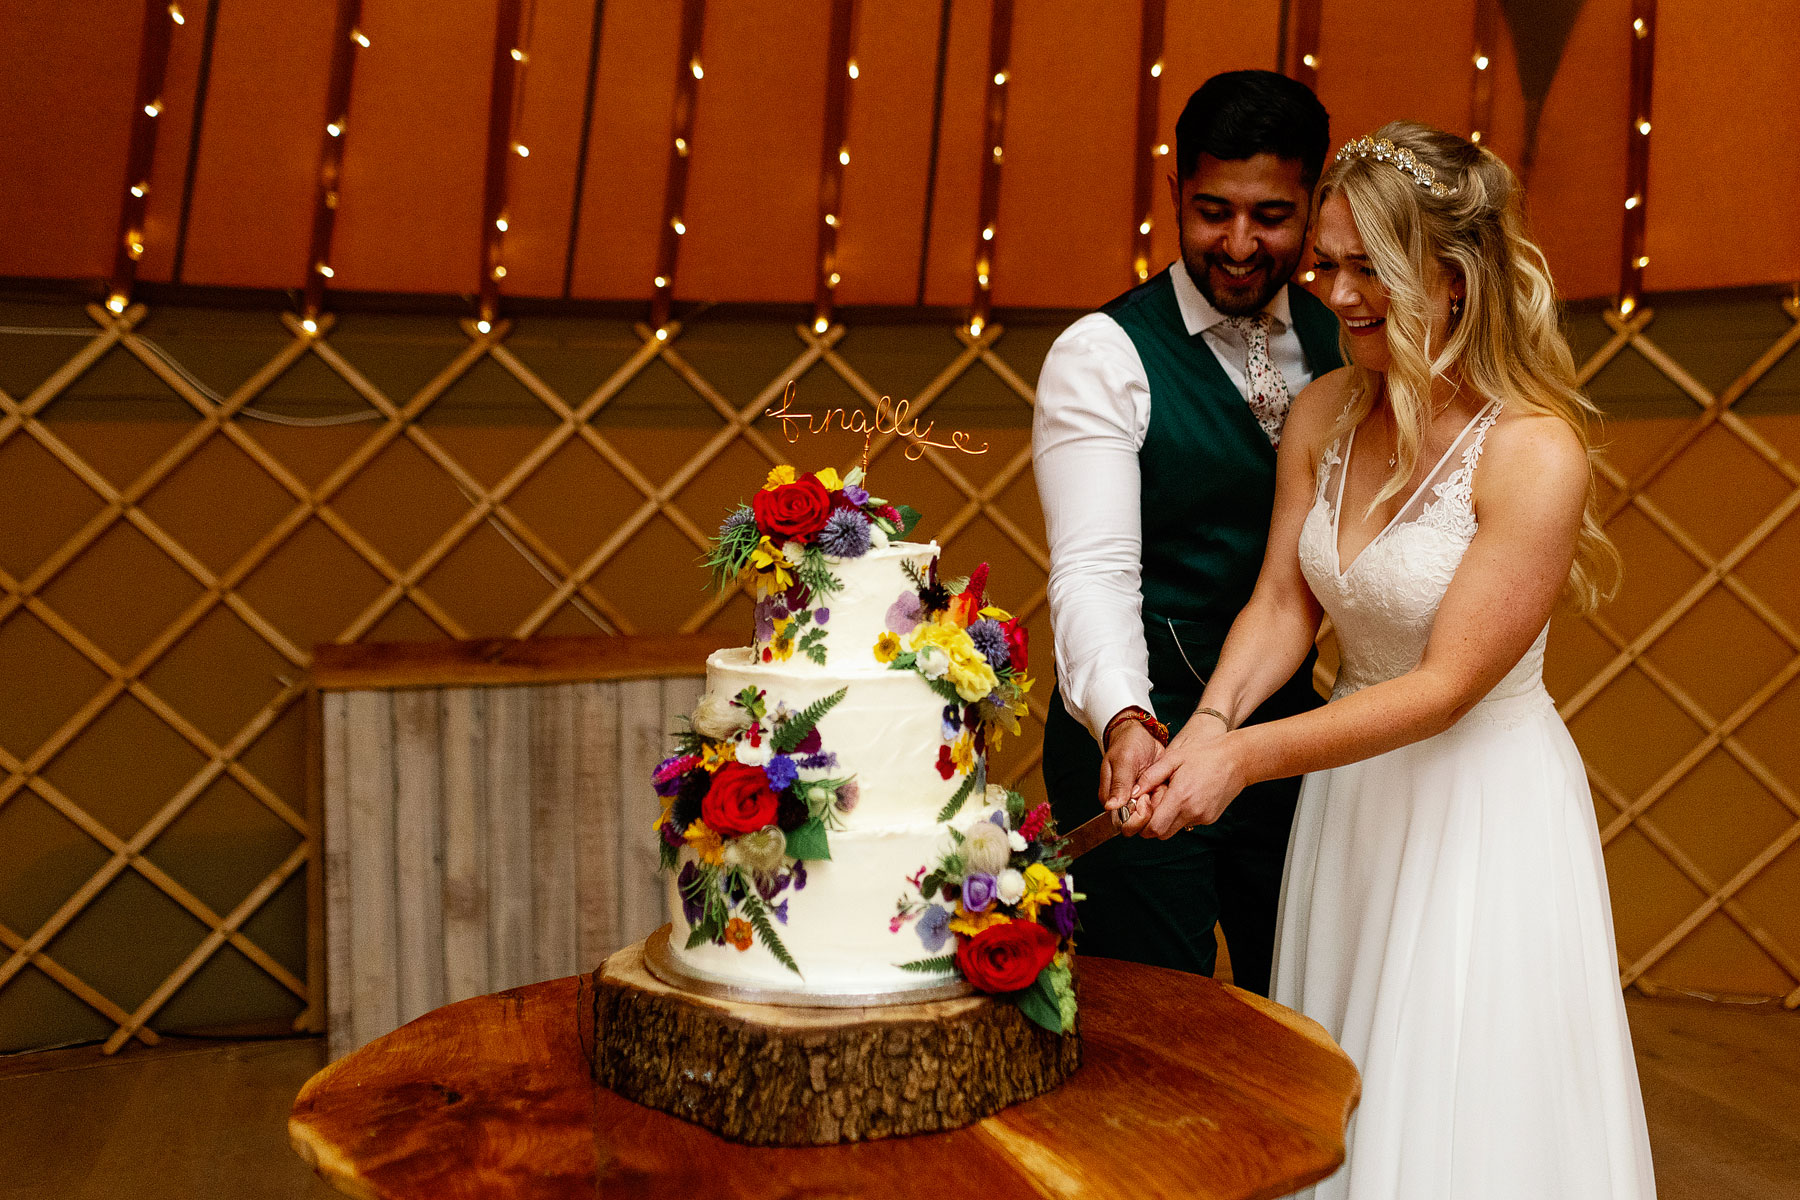 colurful and beautiful wedding cake ideas with a bride and groom cutting cake